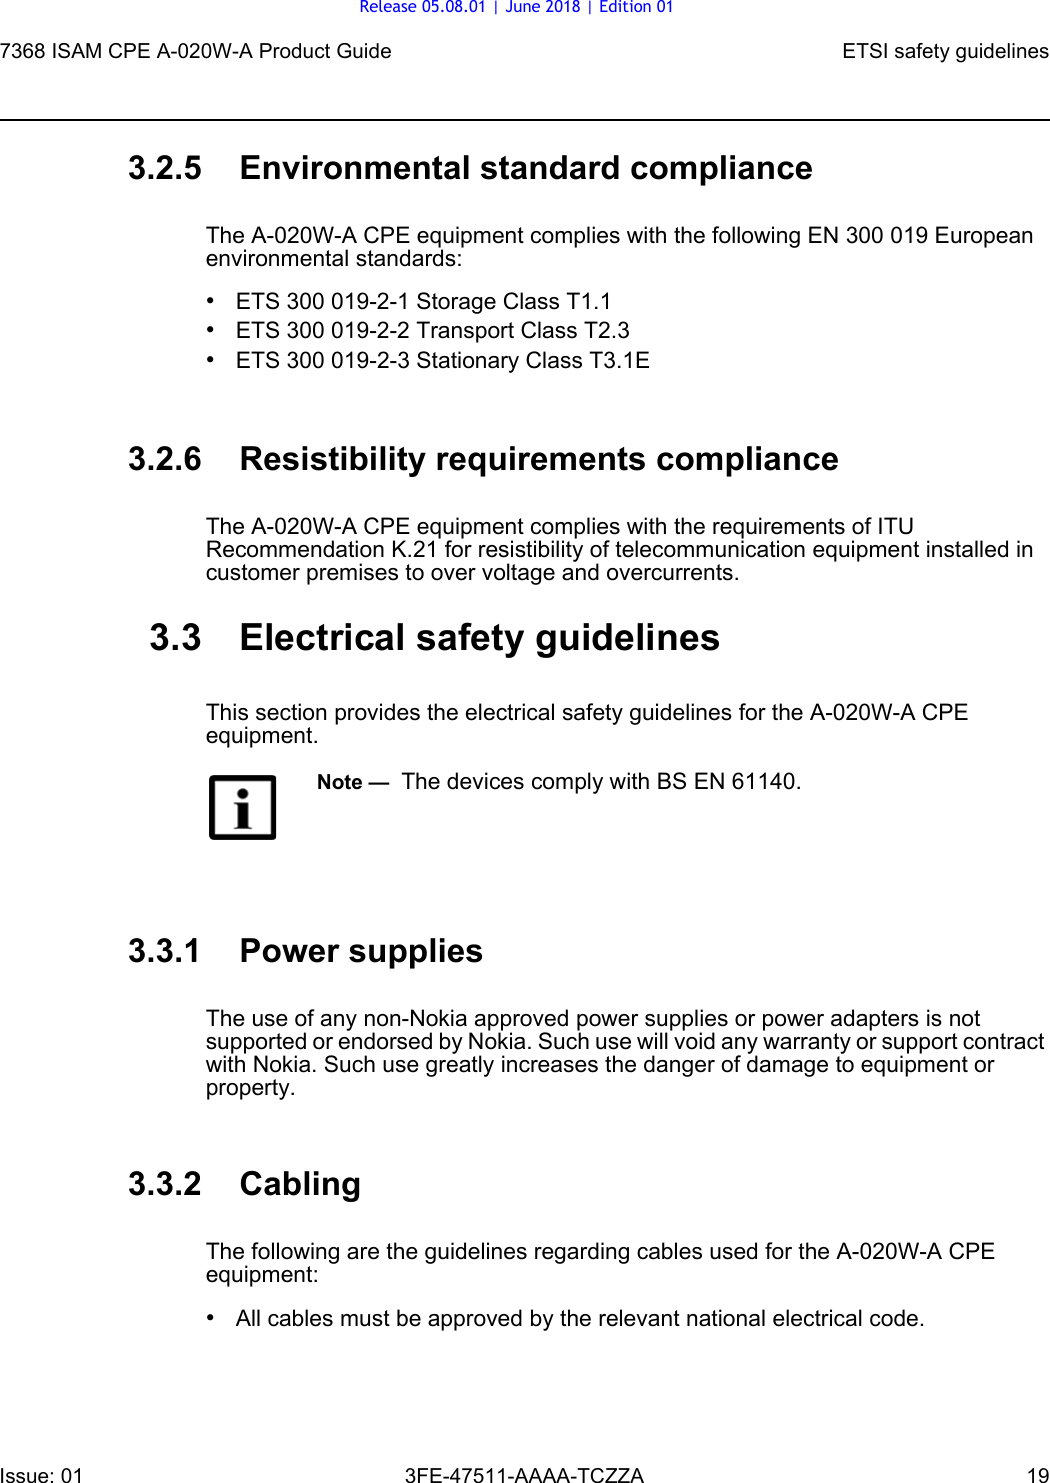 7368 ISAM CPE A-020W-A Product Guide ETSI safety guidelinesIssue: 01 3FE-47511-AAAA-TCZZA 19 3.2.5 Environmental standard complianceThe A-020W-A CPE equipment complies with the following EN 300 019 European environmental standards:•ETS 300 019-2-1 Storage Class T1.1•ETS 300 019-2-2 Transport Class T2.3•ETS 300 019-2-3 Stationary Class T3.1E3.2.6 Resistibility requirements complianceThe A-020W-A CPE equipment complies with the requirements of ITU Recommendation K.21 for resistibility of telecommunication equipment installed in customer premises to over voltage and overcurrents.3.3 Electrical safety guidelinesThis section provides the electrical safety guidelines for the A-020W-A CPE equipment.3.3.1 Power suppliesThe use of any non-Nokia approved power supplies or power adapters is not supported or endorsed by Nokia. Such use will void any warranty or support contract with Nokia. Such use greatly increases the danger of damage to equipment or property.3.3.2 CablingThe following are the guidelines regarding cables used for the A-020W-A CPE equipment:•All cables must be approved by the relevant national electrical code.Note —  The devices comply with BS EN 61140.Release 05.08.01 | June 2018 | Edition 01